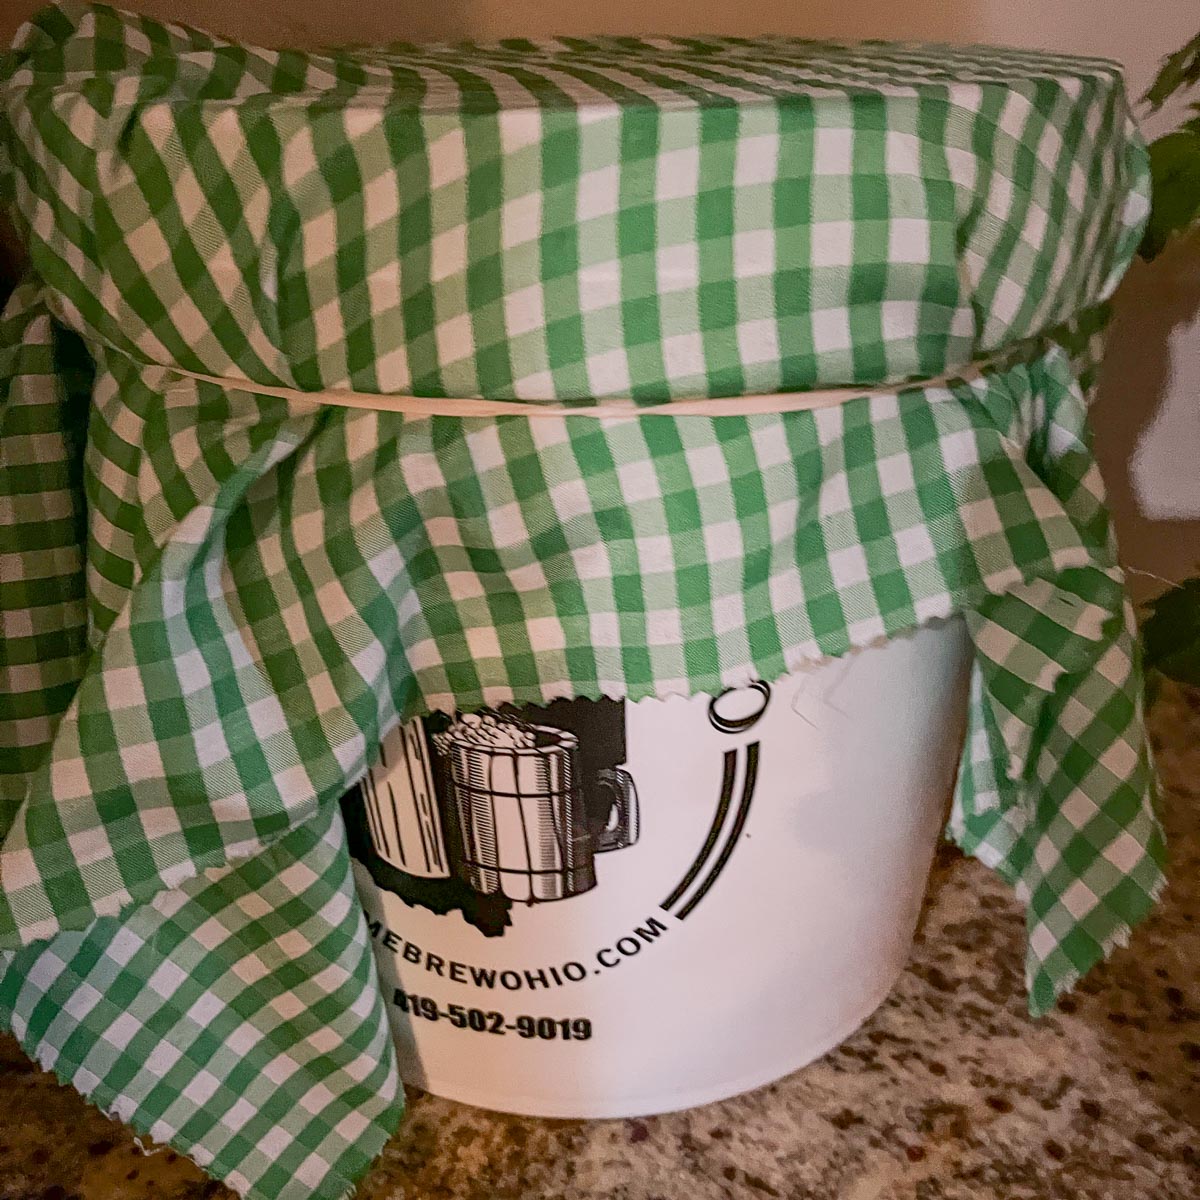 primary fermentor covered with a green and white checkered napkin